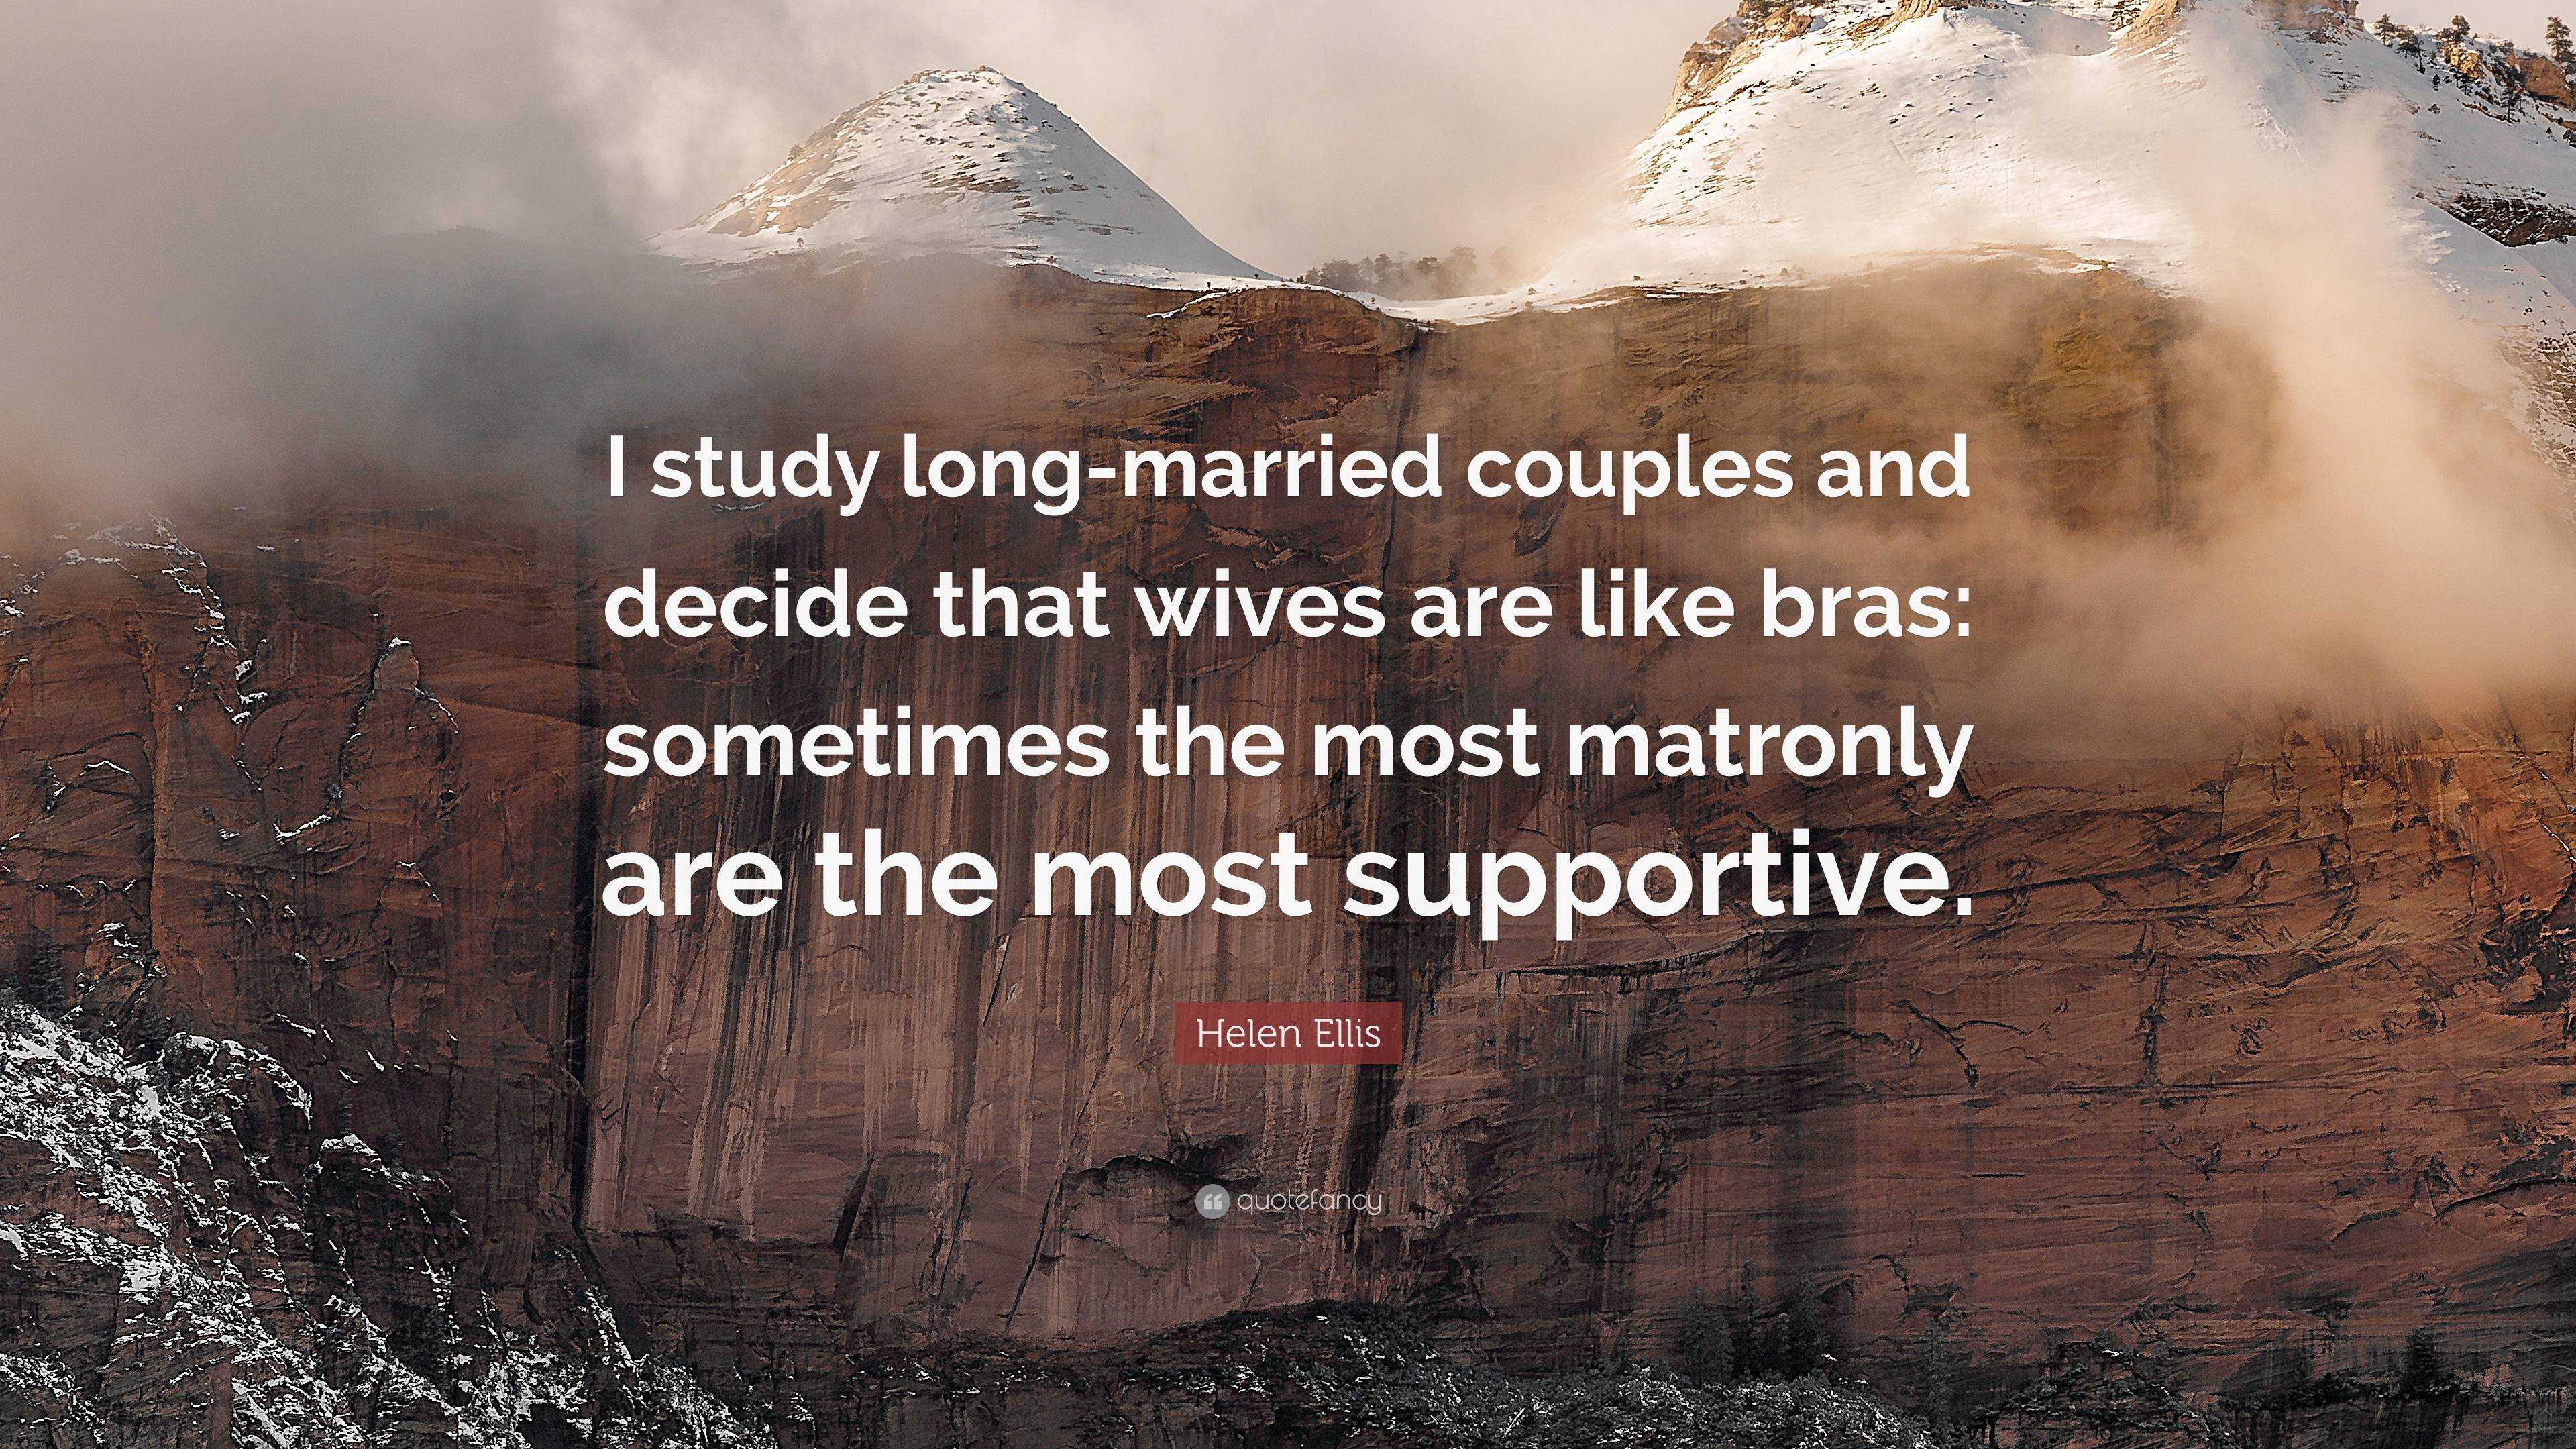 https://quotefancy.com/media/wallpaper/3840x2160/6567709-Helen-Ellis-Quote-I-study-long-married-couples-and-decide-that.jpg